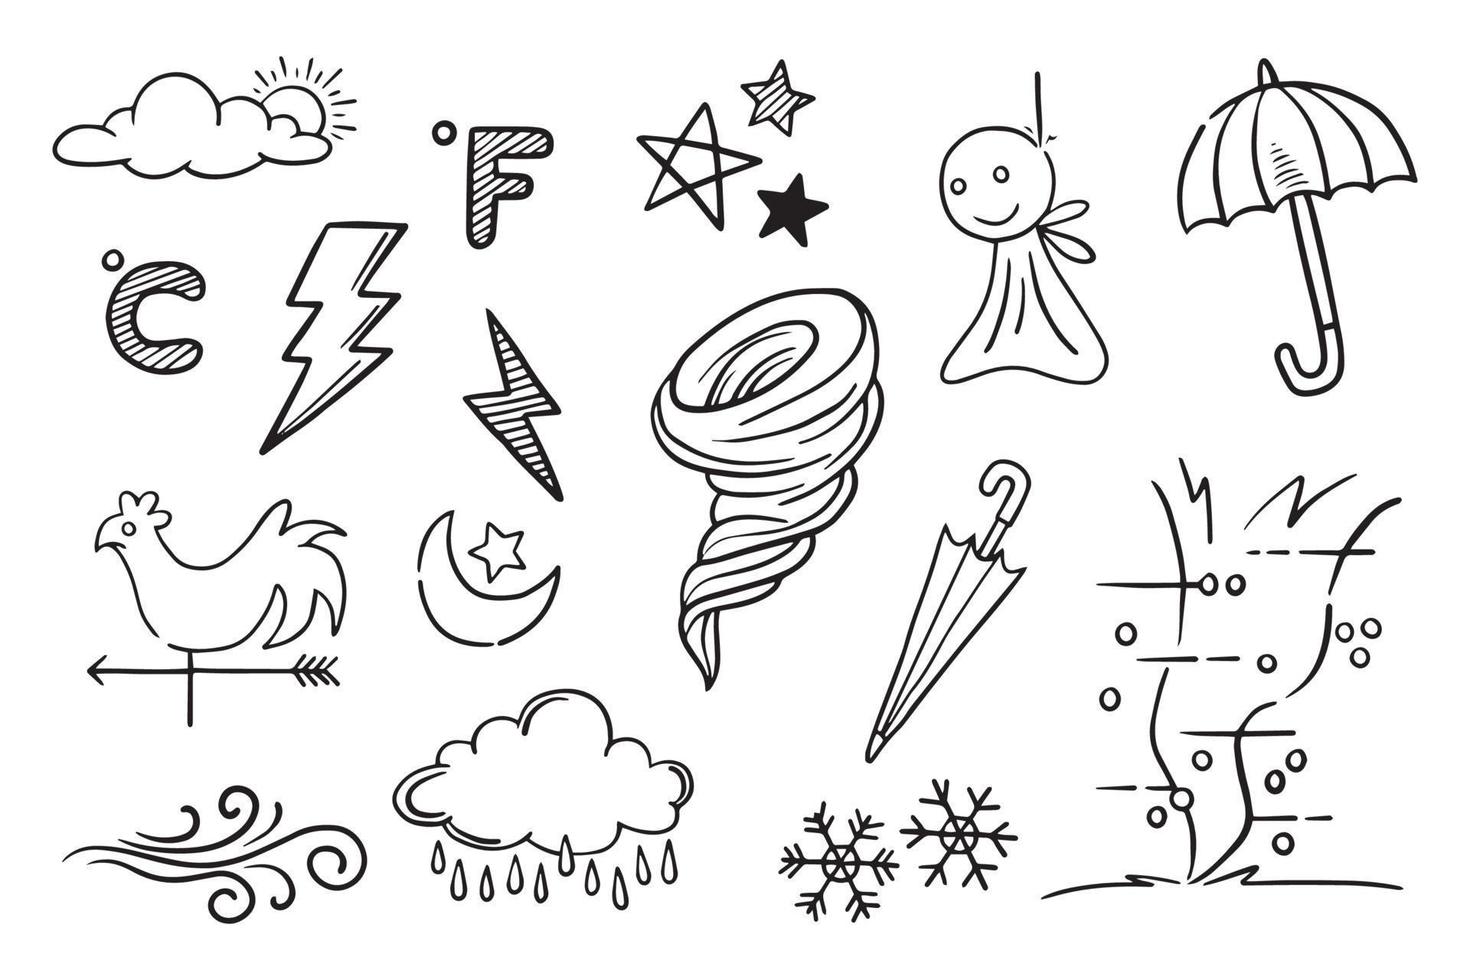 vector set of weather doodle elements, for design purposes